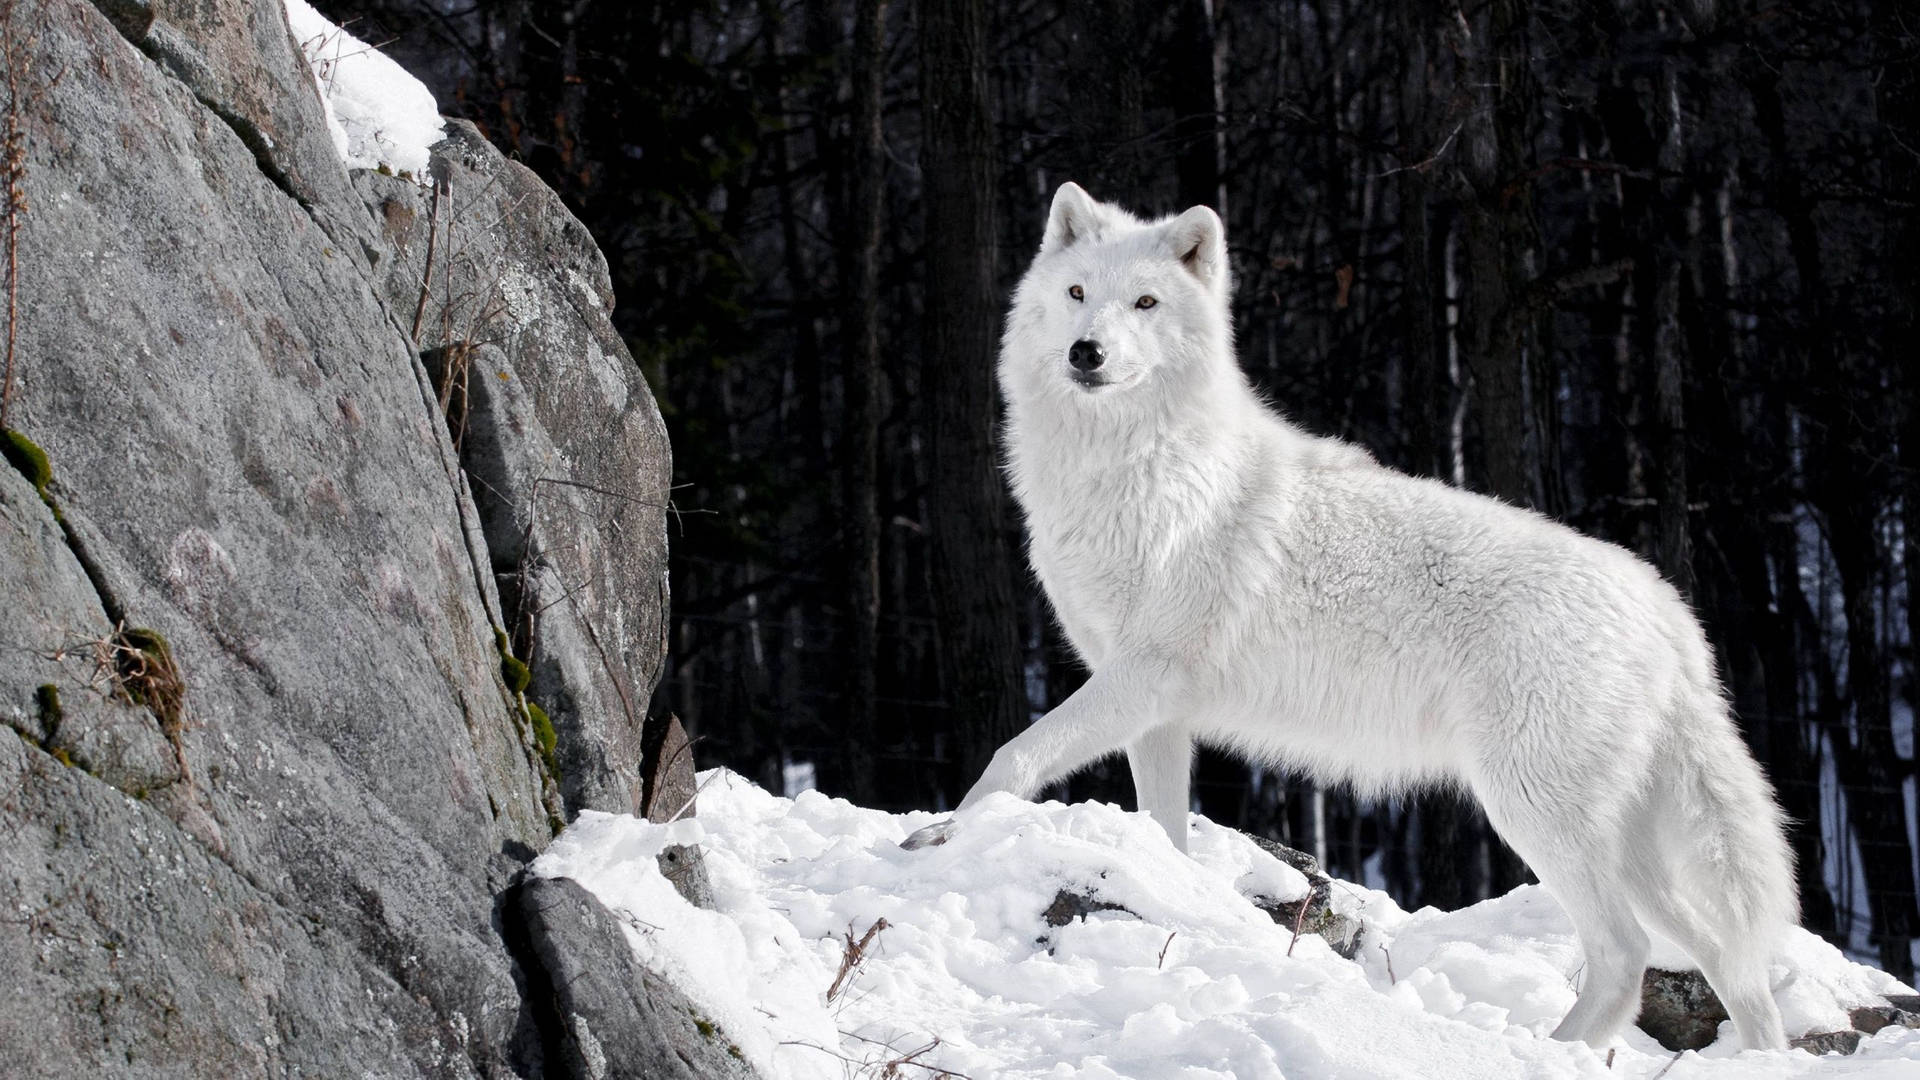 “Fearless and Wild - A lone White Wolf” Wallpaper